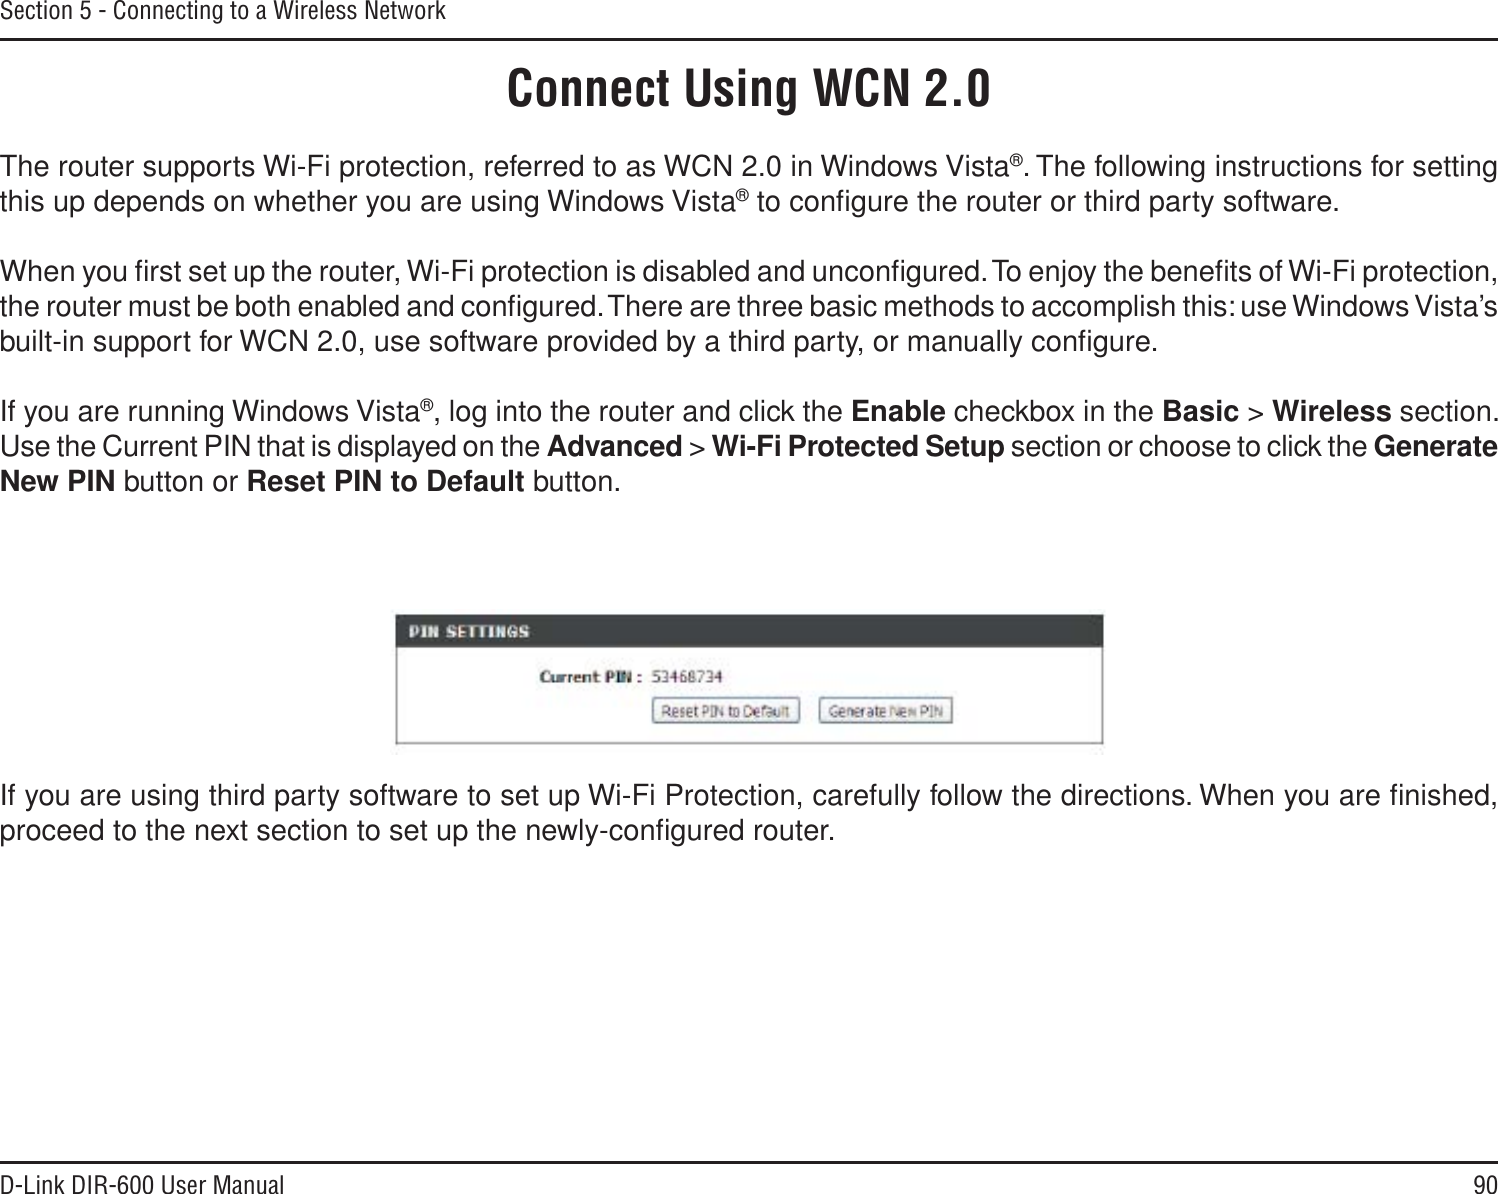 90D-Link DIR-600 User ManualSection 5 - Connecting to a Wireless NetworkConnect Using WCN 2.0The router supports Wi-Fi protection, referred to as WCN 2.0 in Windows Vista®. The following instructions for setting this up depends on whether you are using Windows Vista® to conﬁgure the router or third party software. When you ﬁrst set up the router, Wi-Fi protection is disabled and unconﬁgured. To enjoy the beneﬁts of Wi-Fi protection, the router must be both enabled and conﬁgured. There are three basic methods to accomplish this: use Windows Vista’s built-in support for WCN 2.0, use software provided by a third party, or manually conﬁgure. If you are running Windows Vista®, log into the router and click the Enable checkbox in the Basic &gt; Wireless section. Use the Current PIN that is displayed on the Advanced &gt; Wi-Fi Protected Setup section or choose to click the GenerateNew PIN button or Reset PIN to Default button. If you are using third party software to set up Wi-Fi Protection, carefully follow the directions. When you are ﬁnished, proceed to the next section to set up the newly-conﬁgured router.